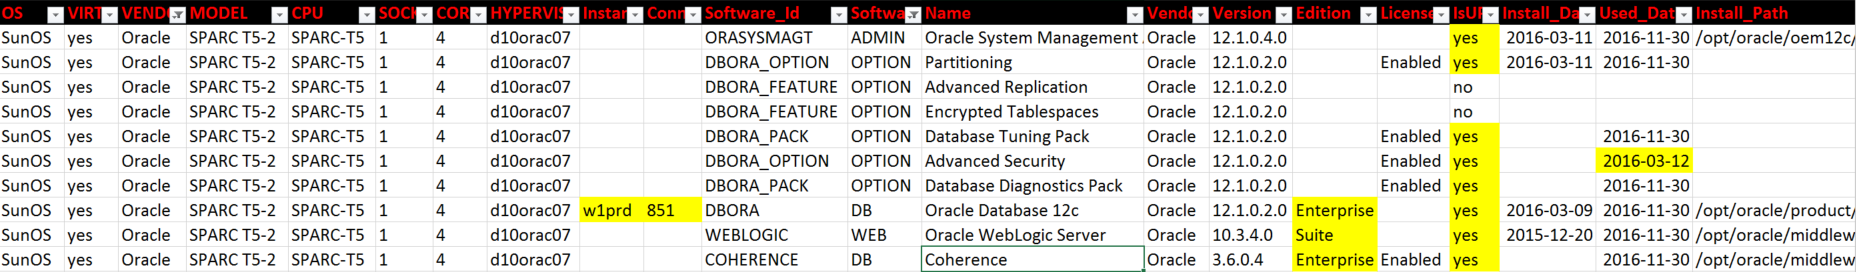 Oracle Licensing Report Example